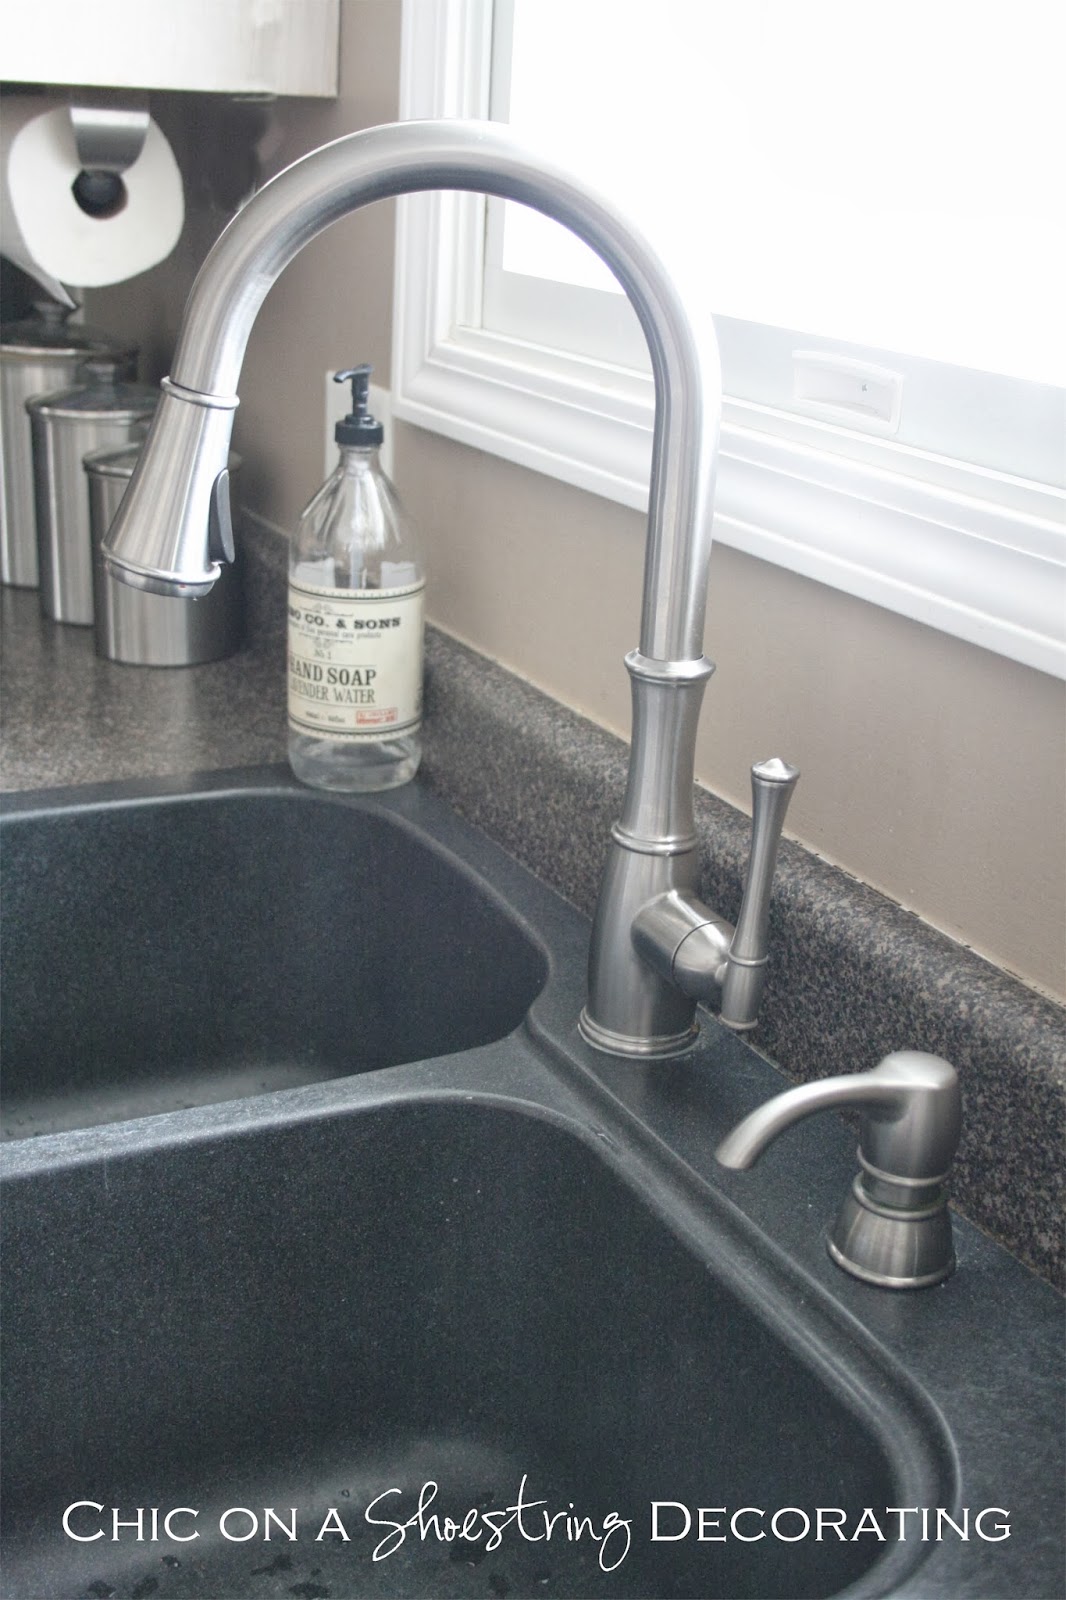 $300 Pfister Faucet Giveaway at Chic on a Shoestring Decorating blog!  Click link to enter: http://chiconashoestringdecorating.blogspot.com/2014/01/300-pfister-faucet-giveaway.html